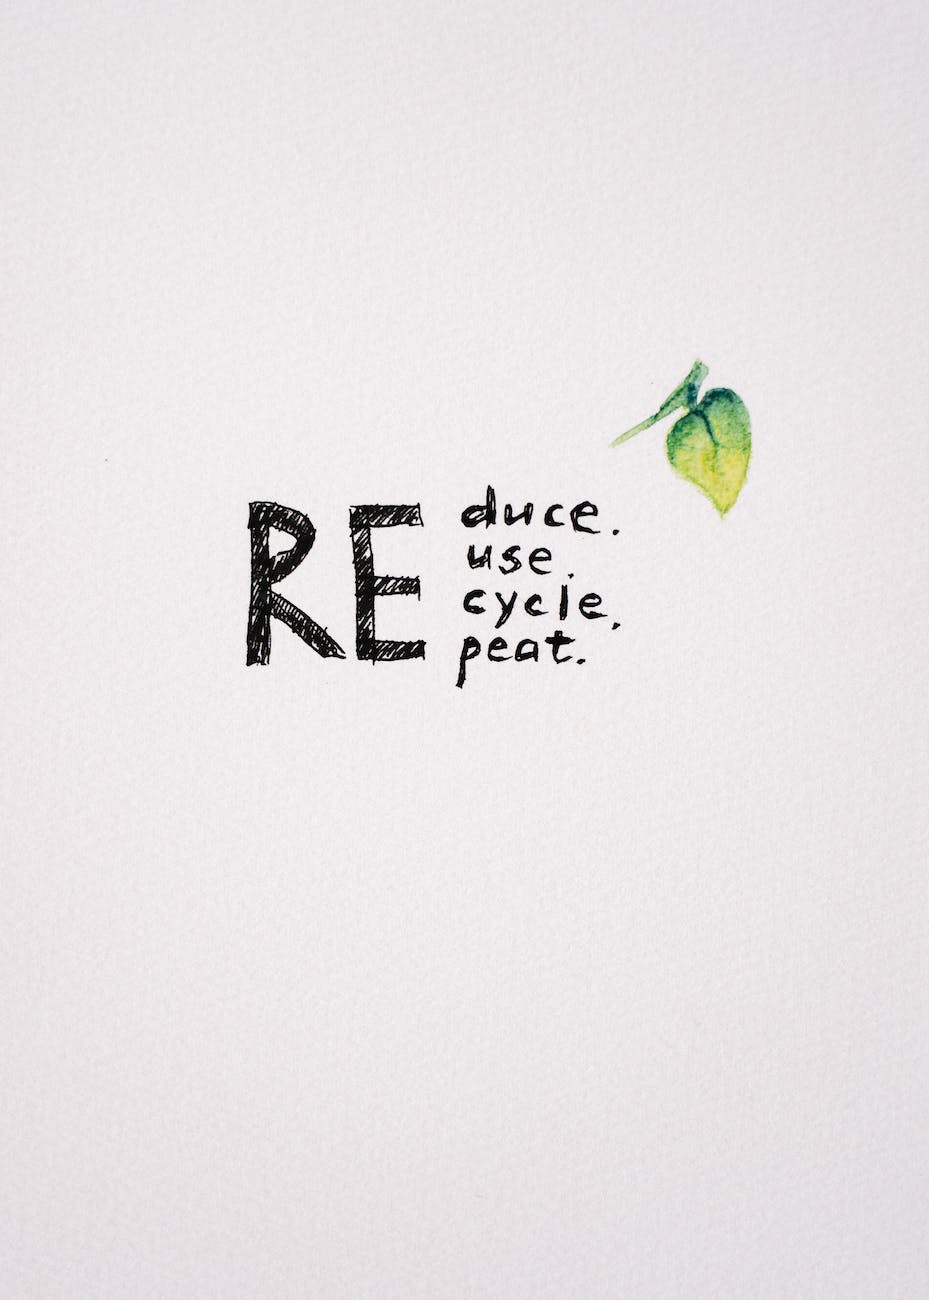 Image with the words reduce, reuse, recycle, repeat